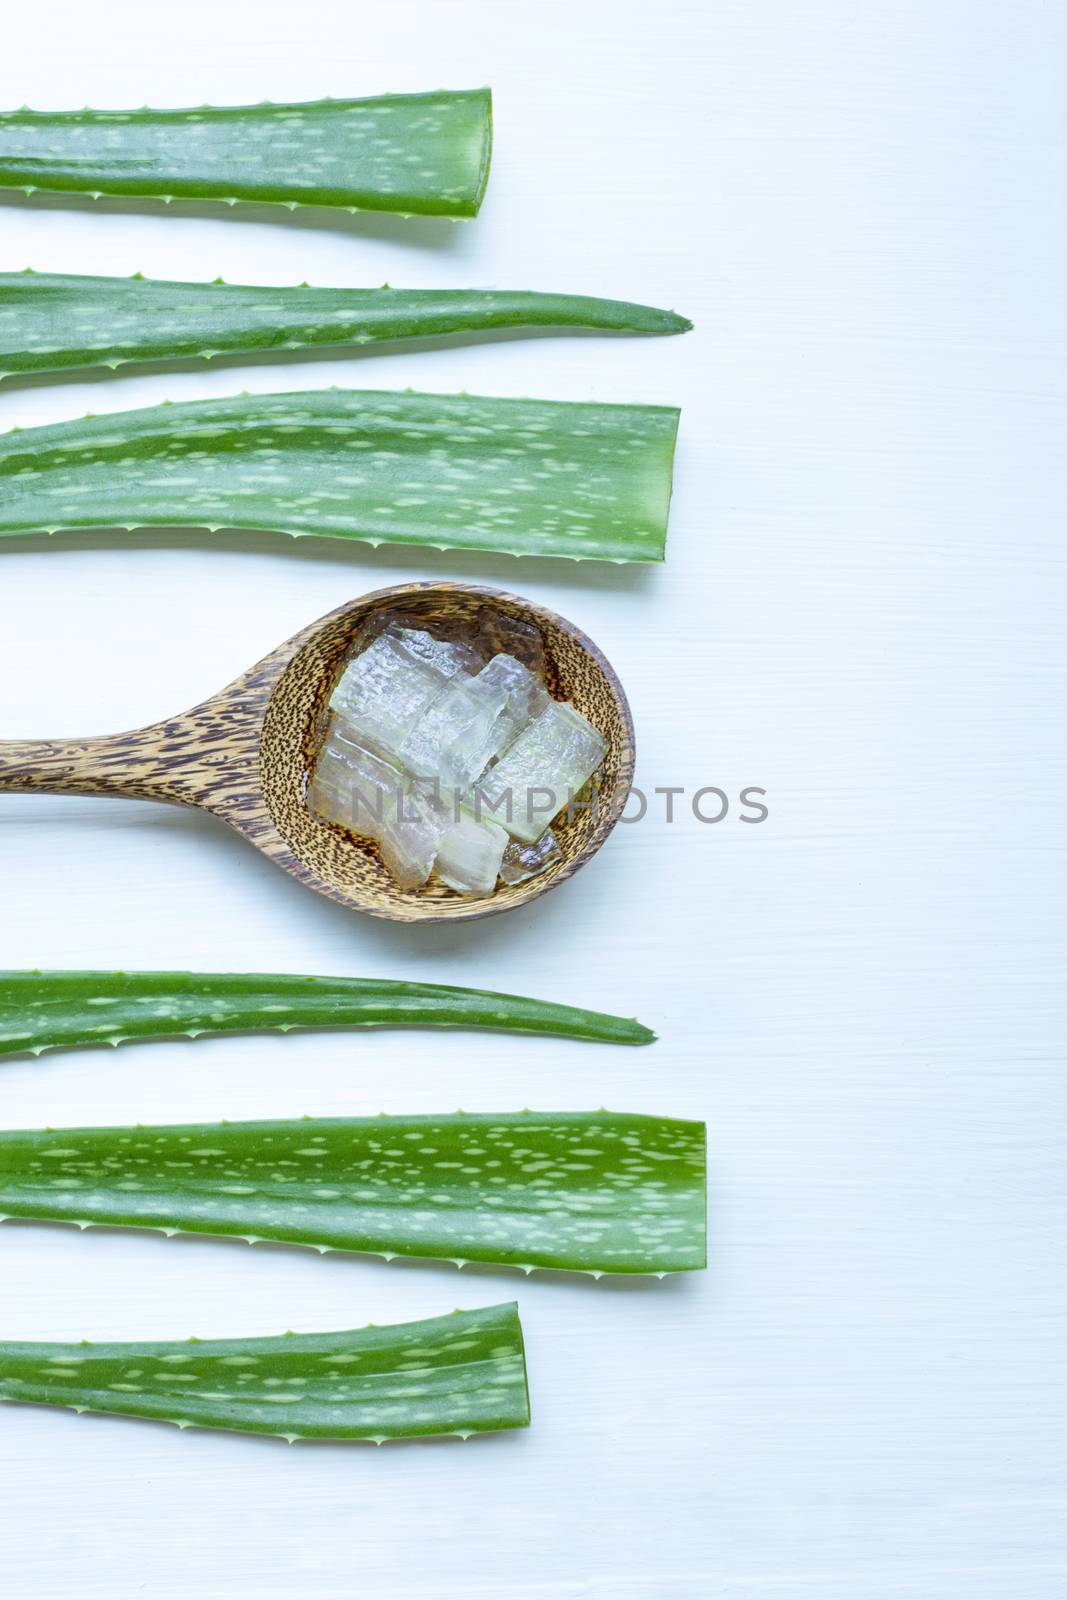 Aloe vera fresh leaves with aloe vera gel on wooden spoon. isolated white.